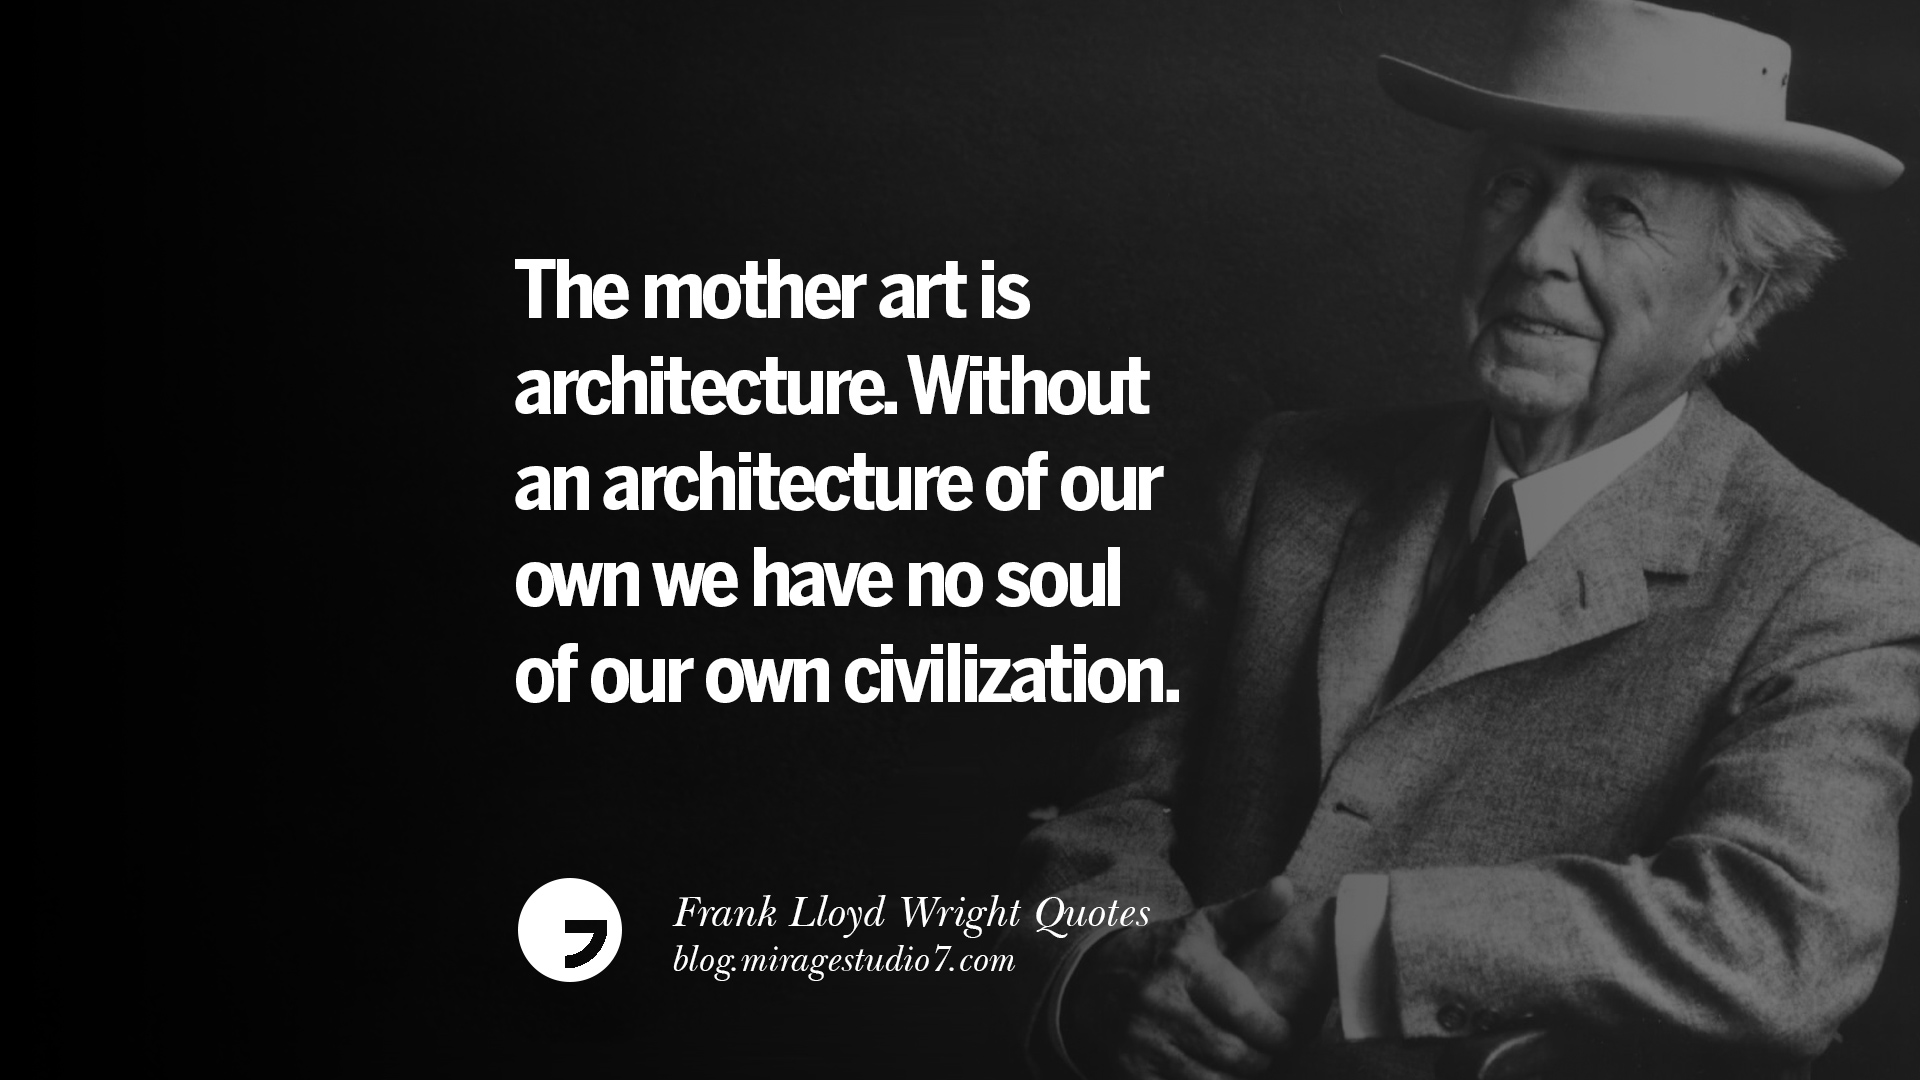 30 Frank Lloyd Wright Quotes On Mother Nature, Space, God, And Architecture